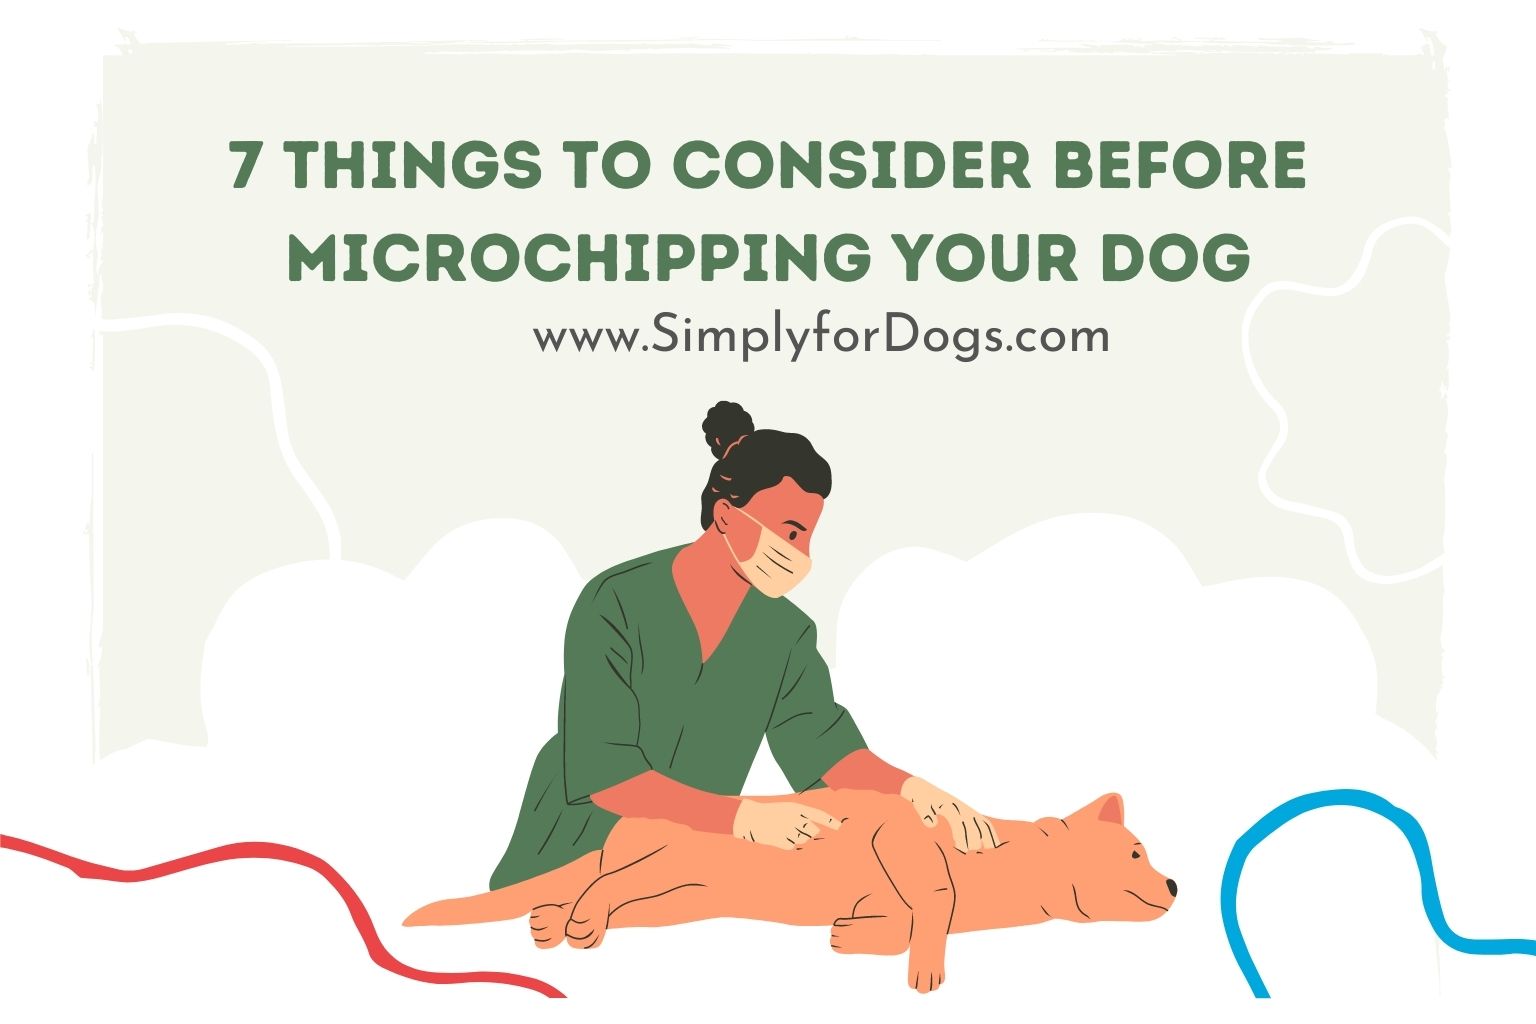 7 Things to Consider Before Microchipping Your Dog